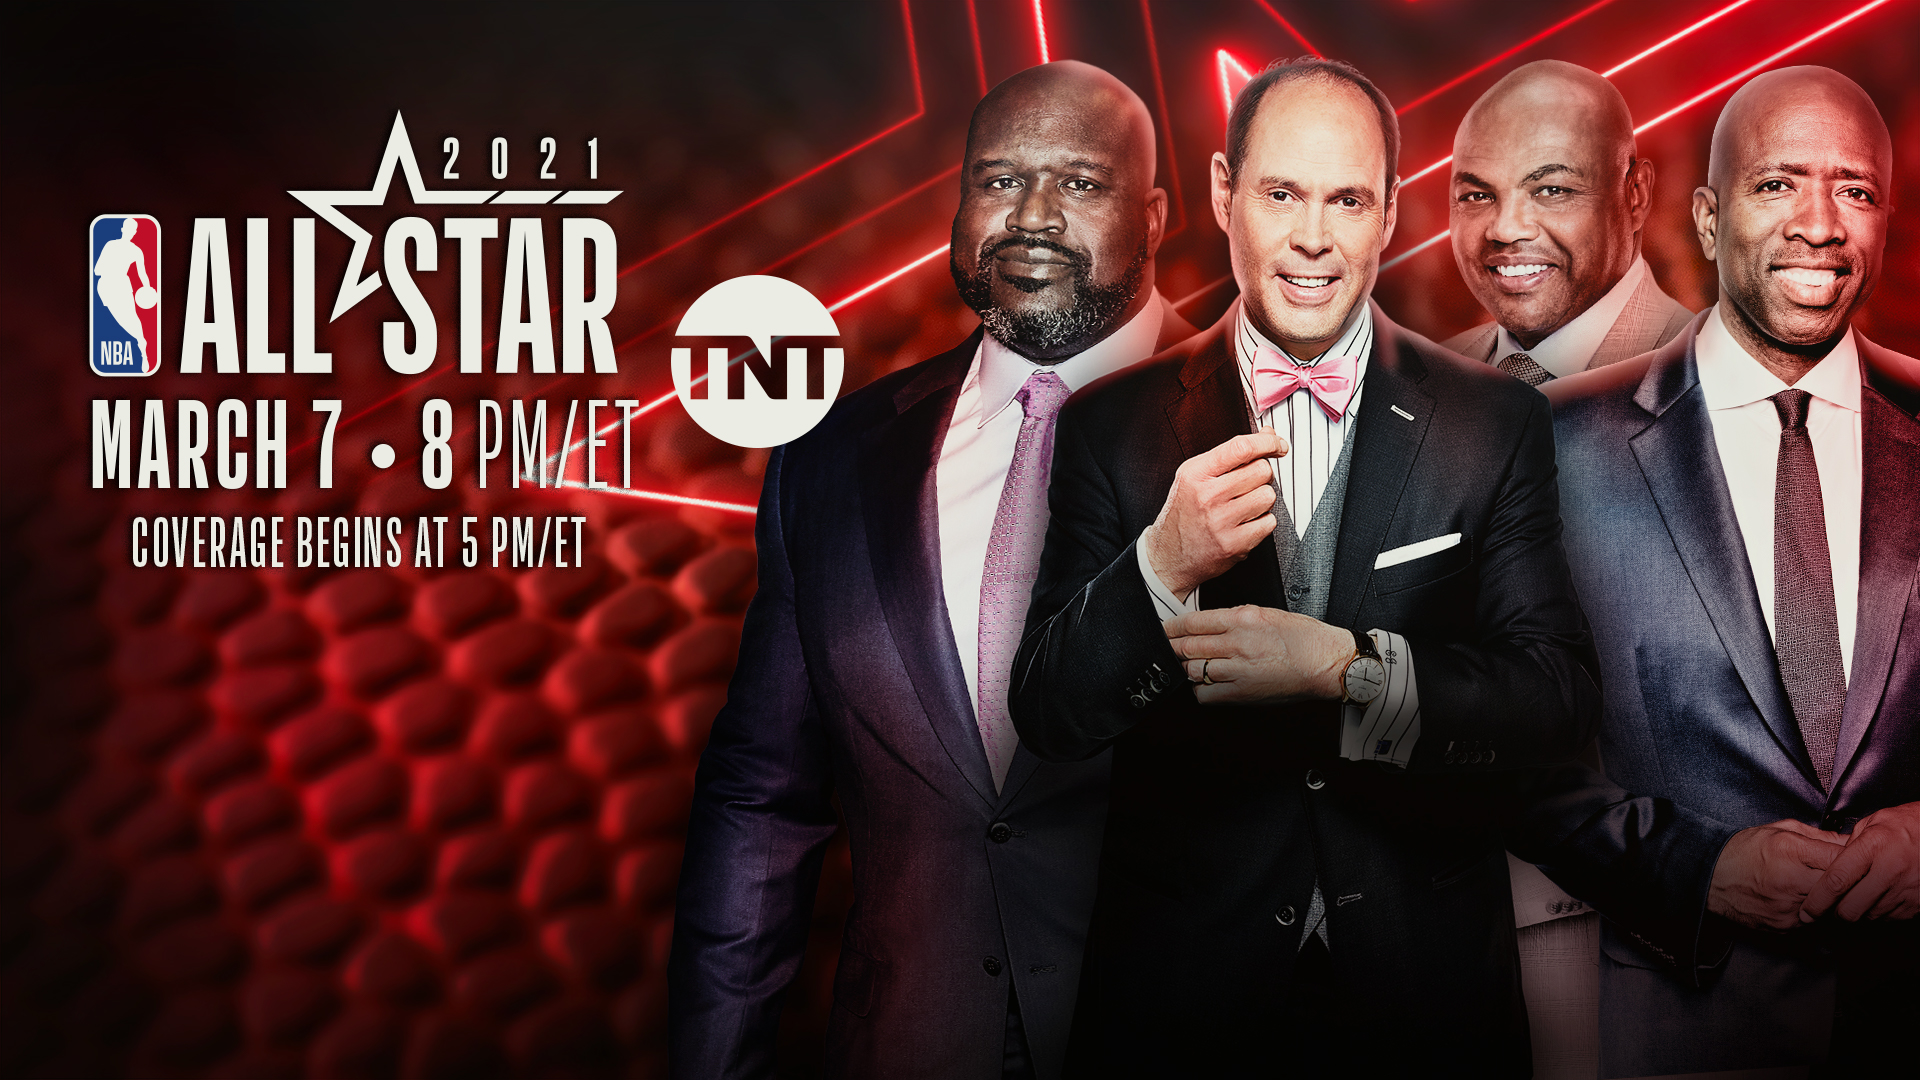 NBA All-Star Preview Get Your Game On, Go Play